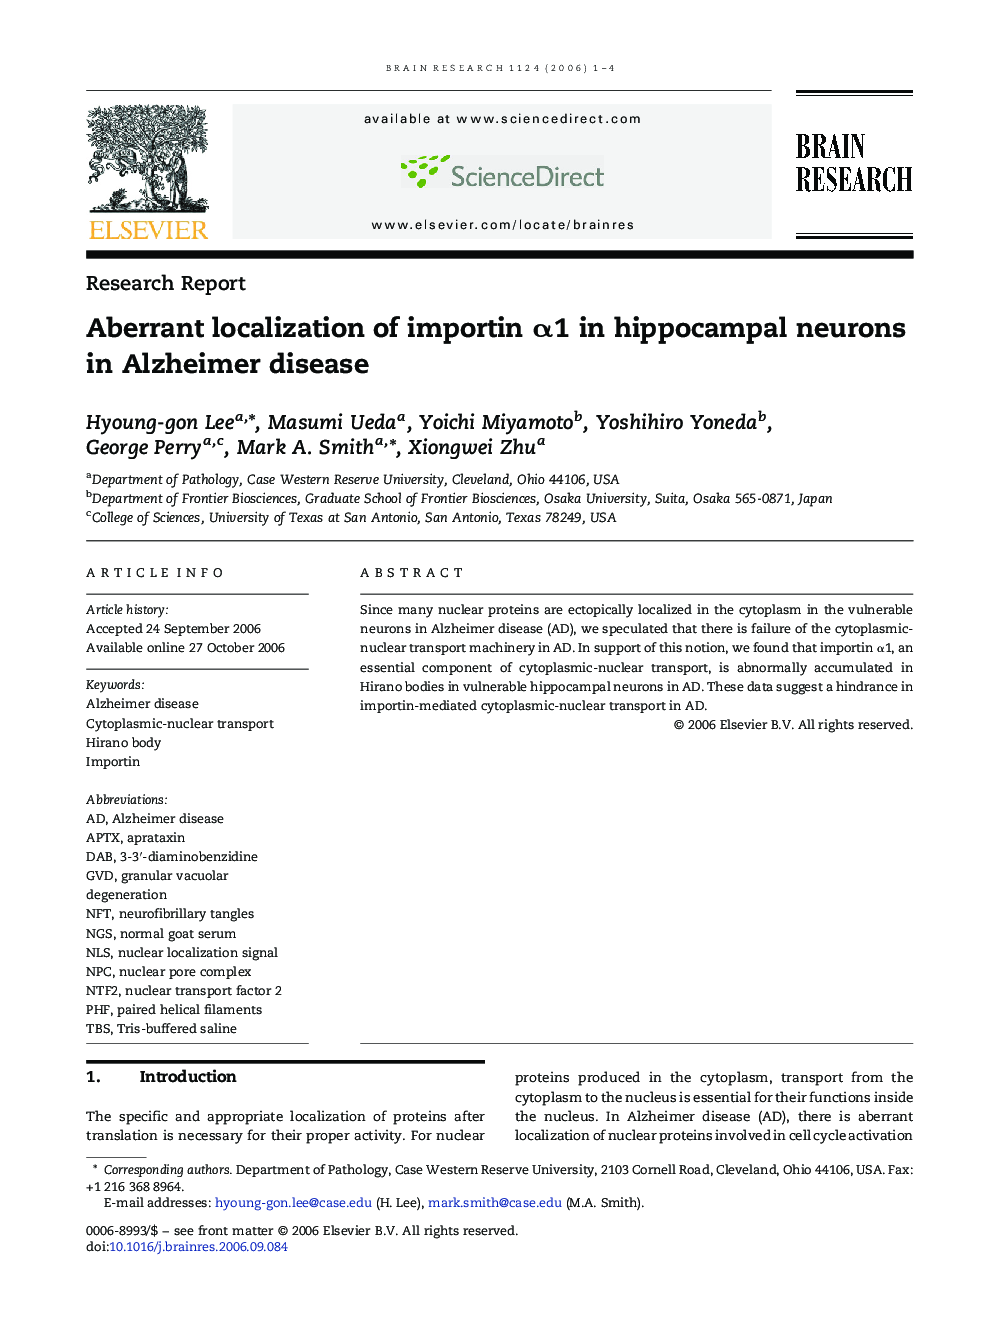 Aberrant localization of importin α1 in hippocampal neurons in Alzheimer disease